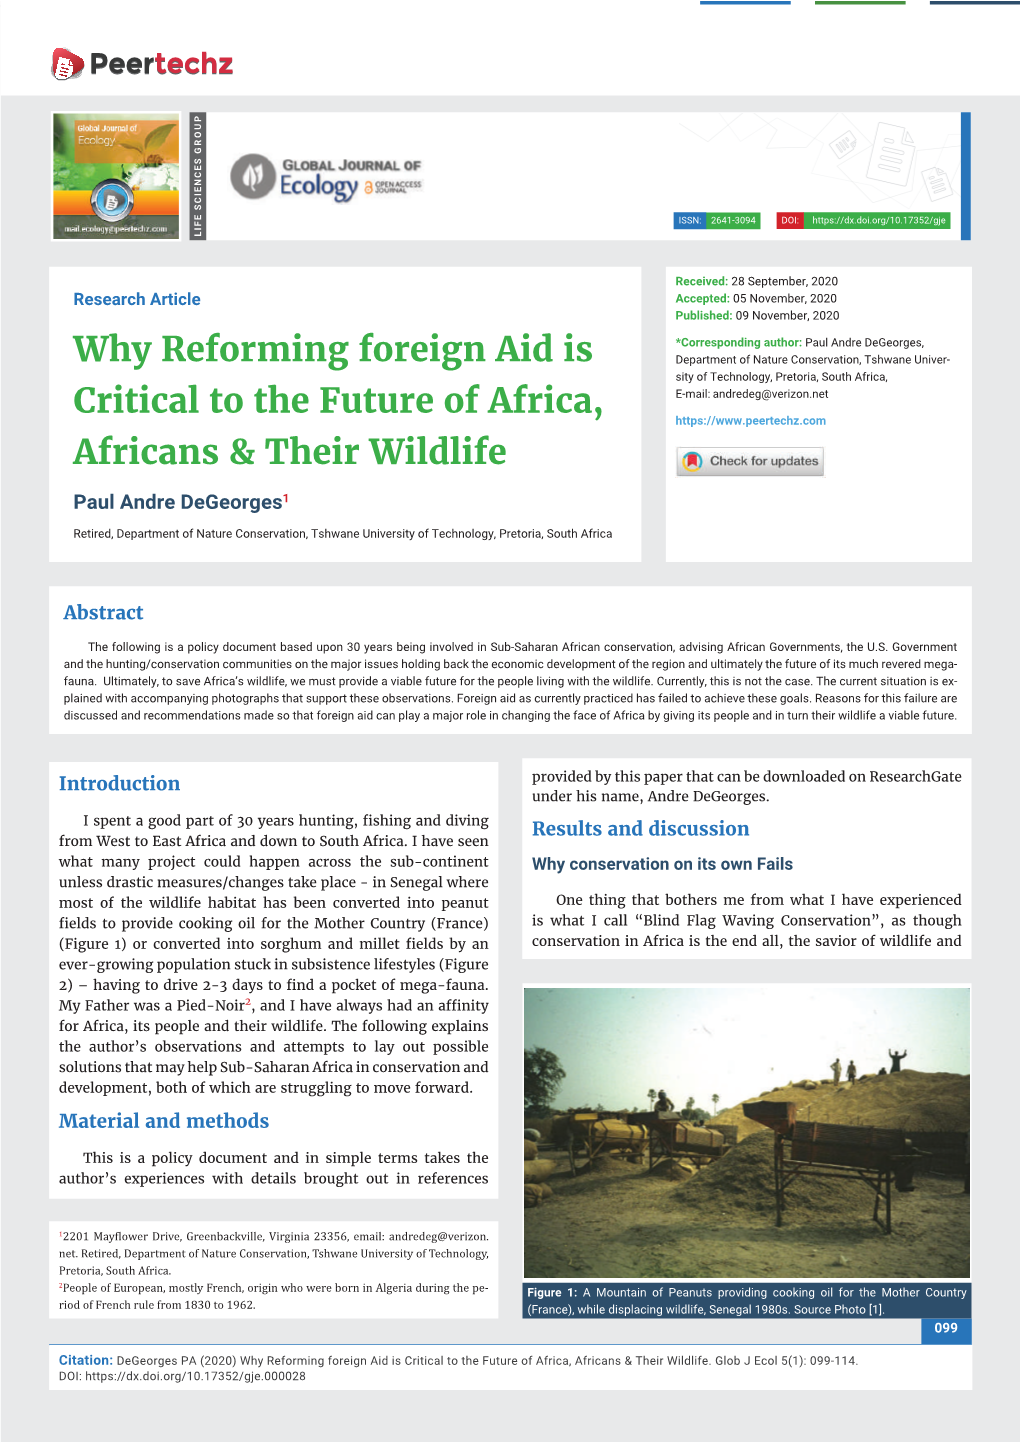 Why Reforming Foreign Aid Is Critical to the Future of Africa, Africans & Their Wildlife